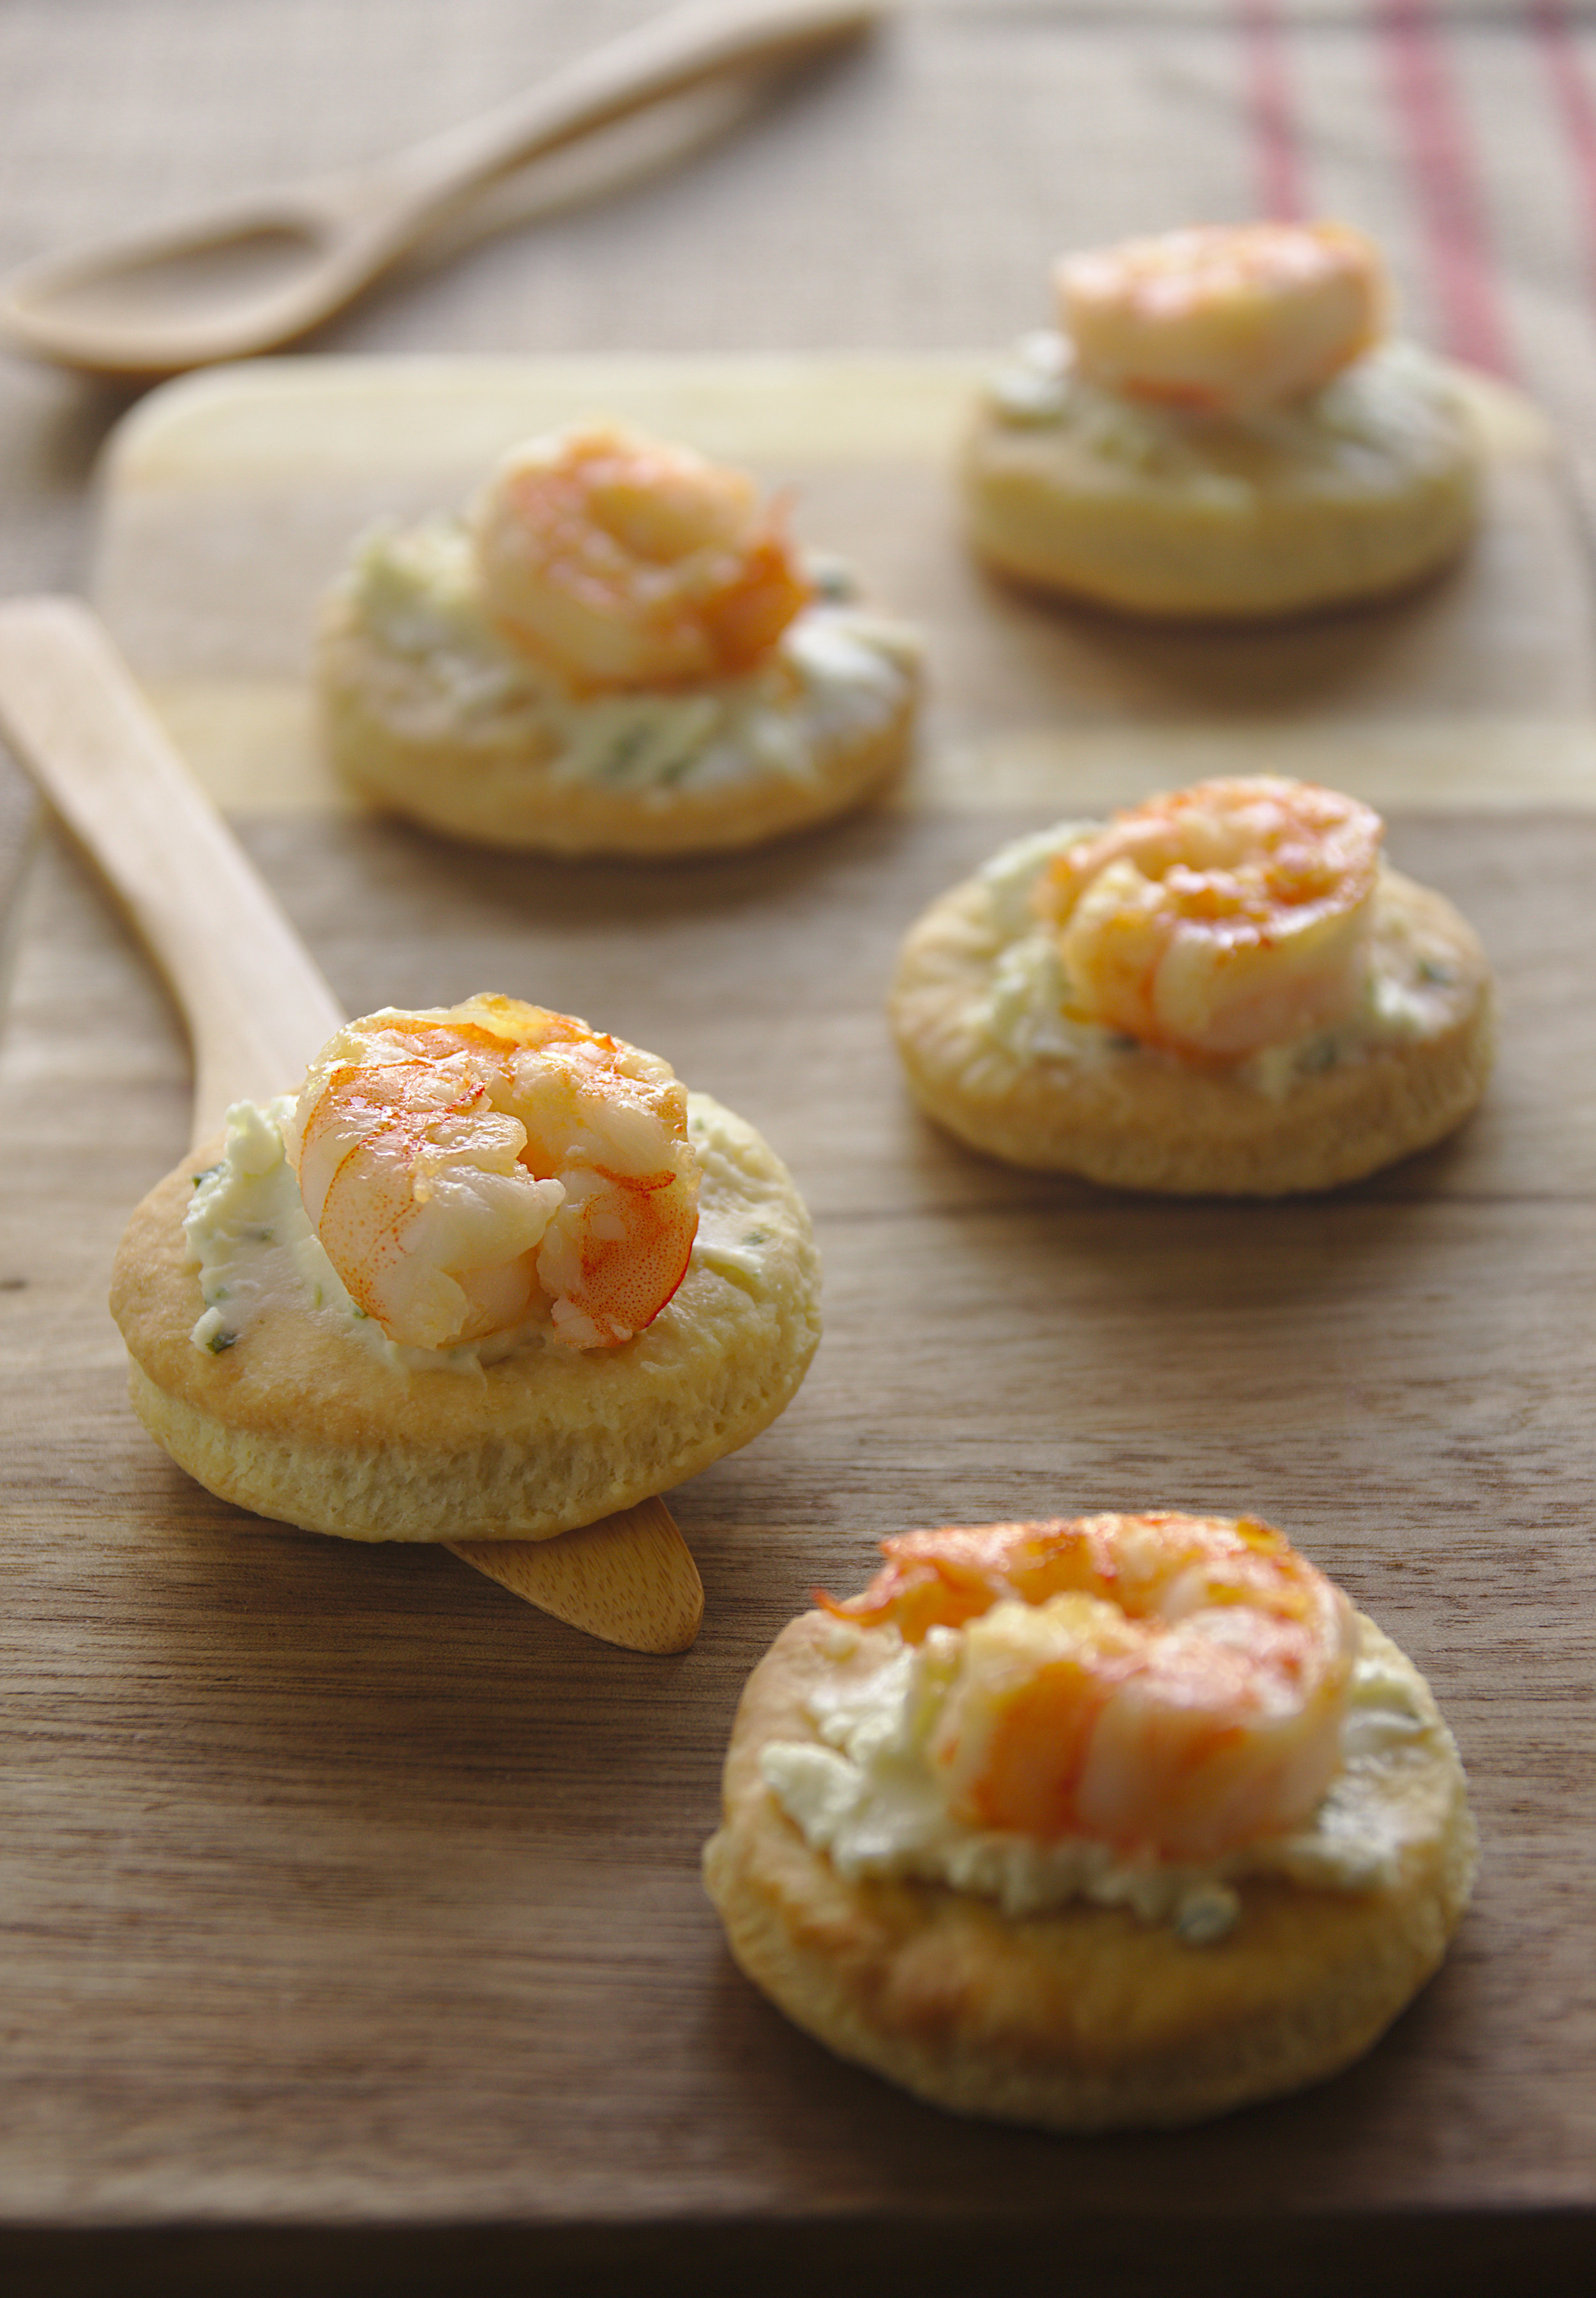 Canapés with shrimps and Pastis